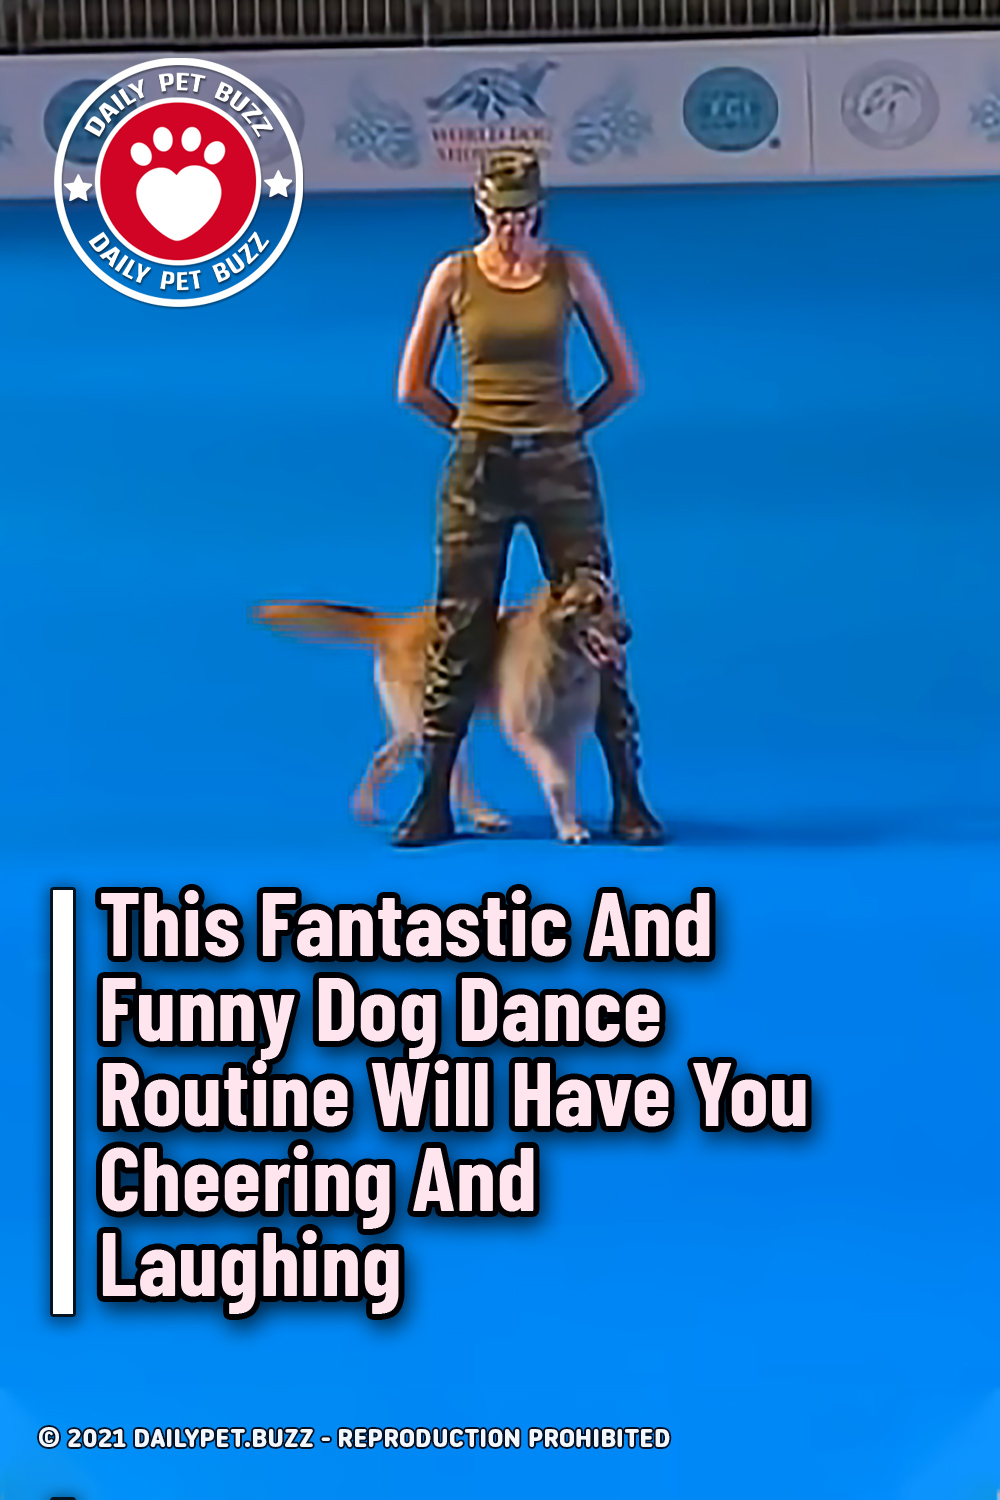 This Fantastic And Funny Dog Dance Routine Will Have You Cheering And Laughing